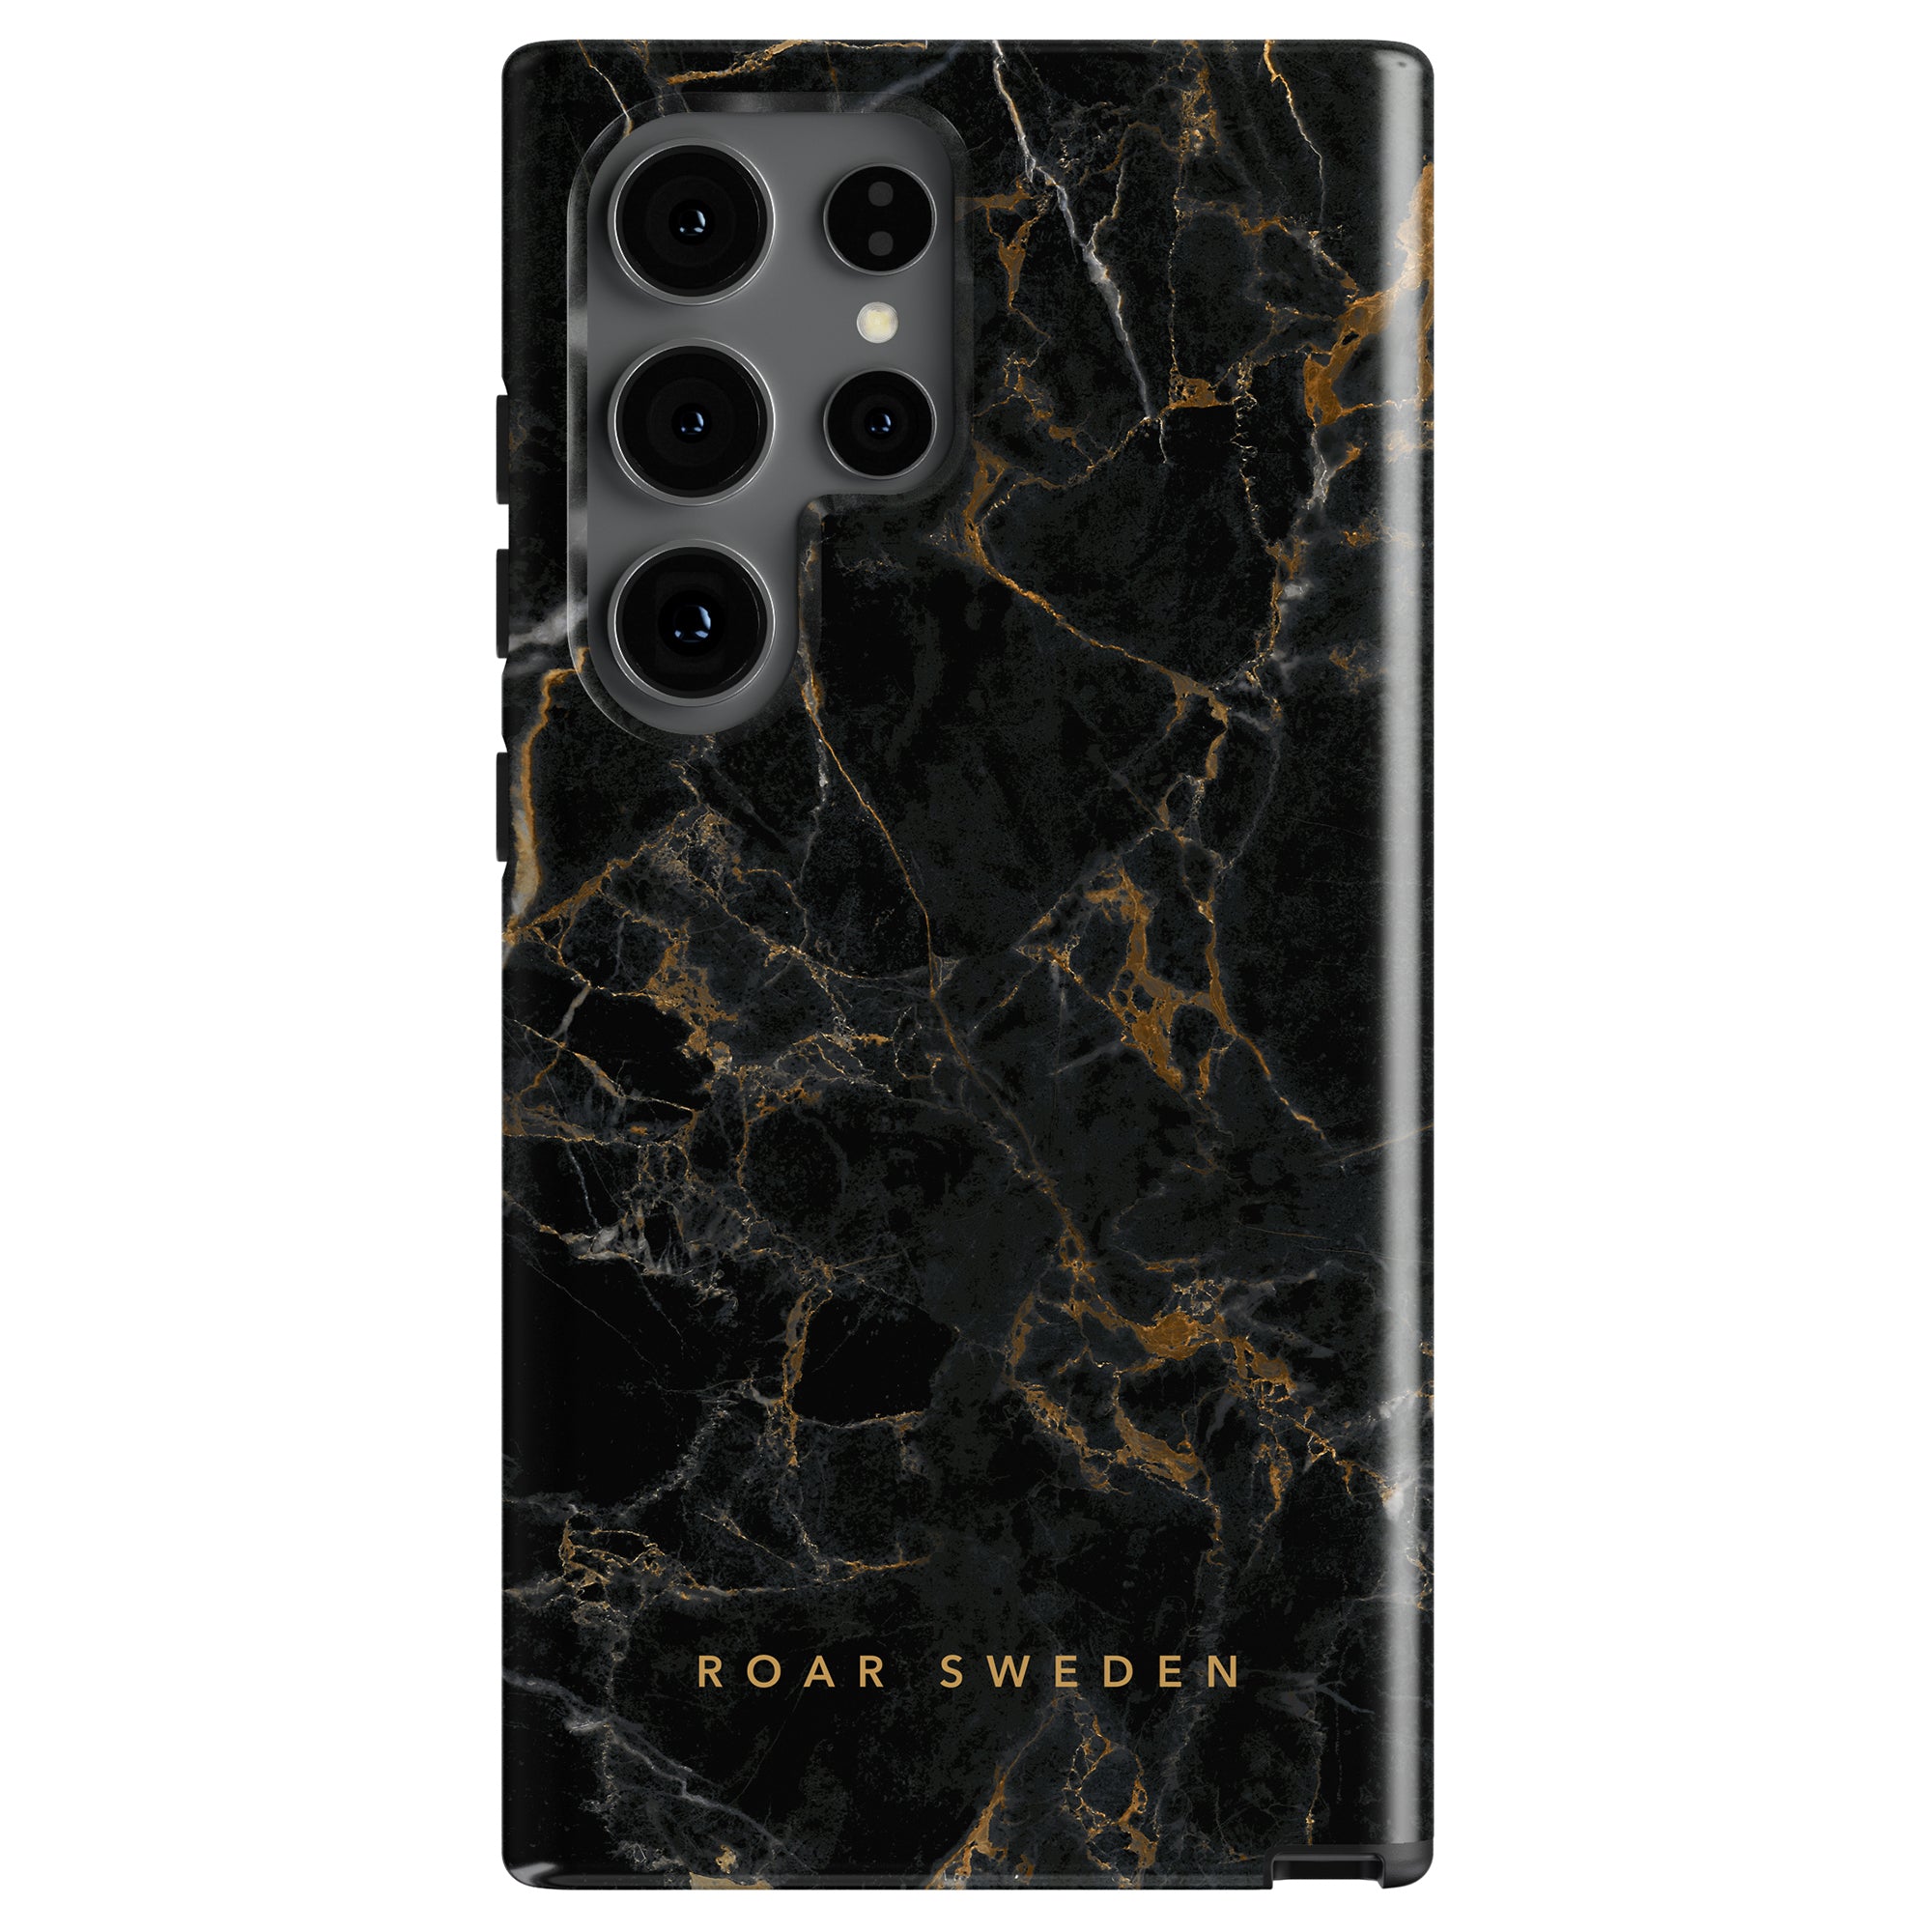 A smartphone with a marmorinspirerad design, boasting a black marble-patterned mobilskal with gold veining and the text "ROAR SWEDEN" at the bottom. The phone's camera module has multiple lenses, featuring the Portoro - Tough Case.